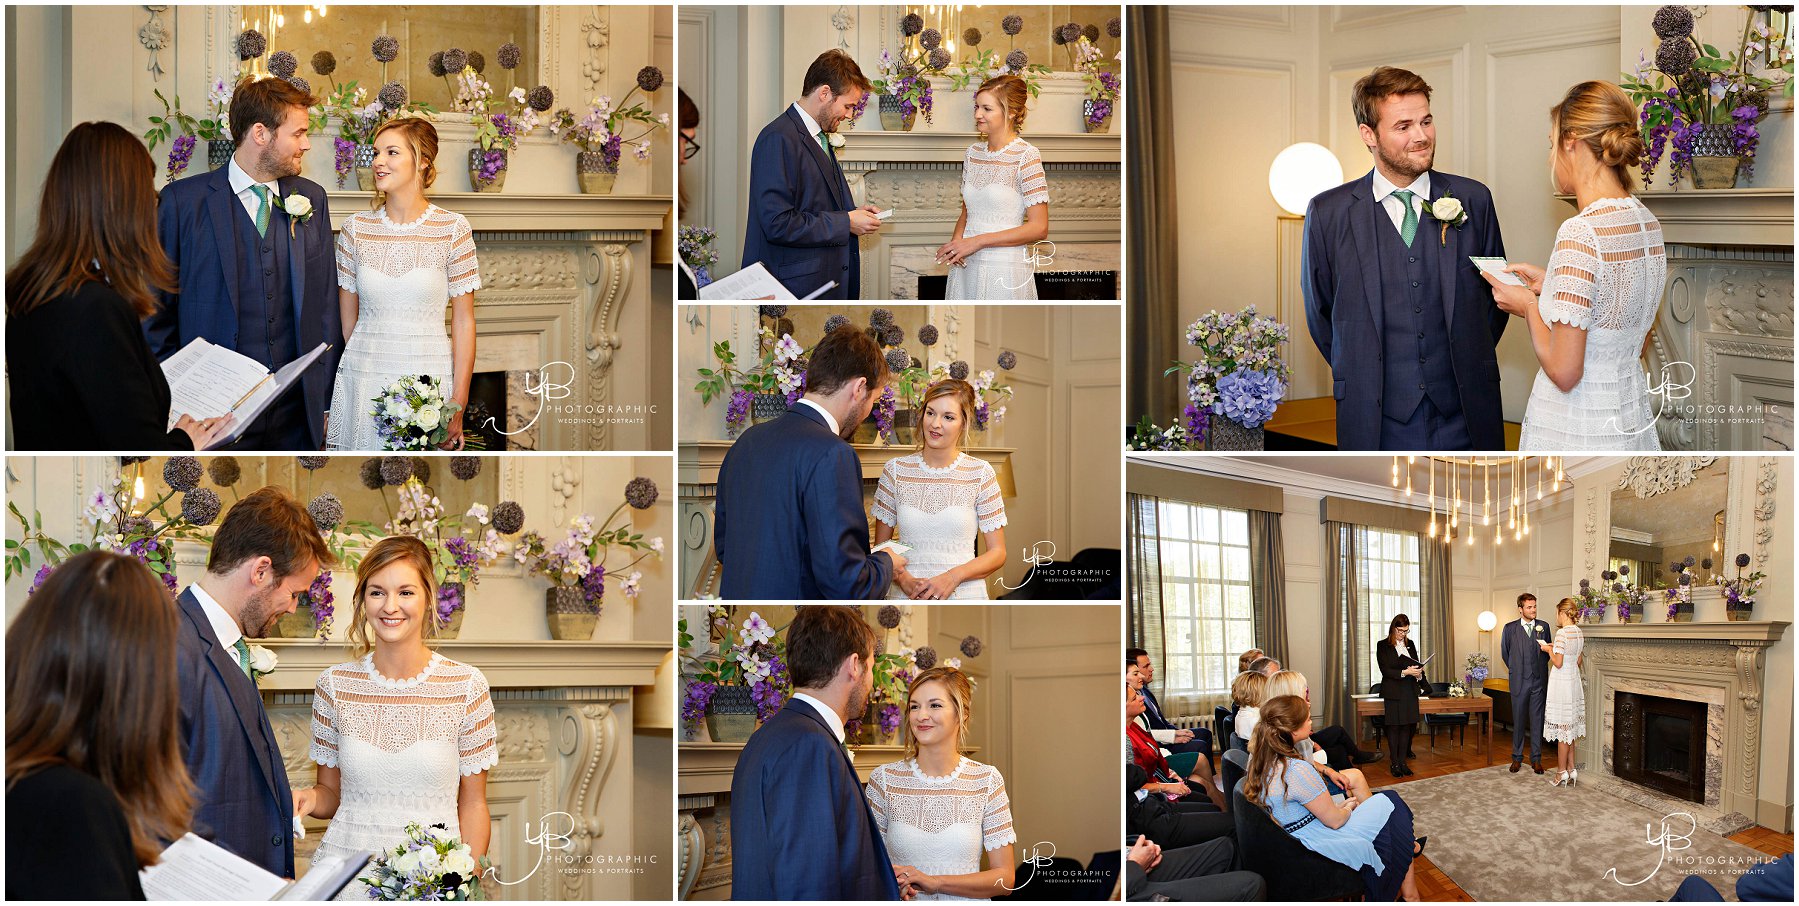 Wedding ceremony photos from the Pimlico Room at The Old Marylebone Town Hall